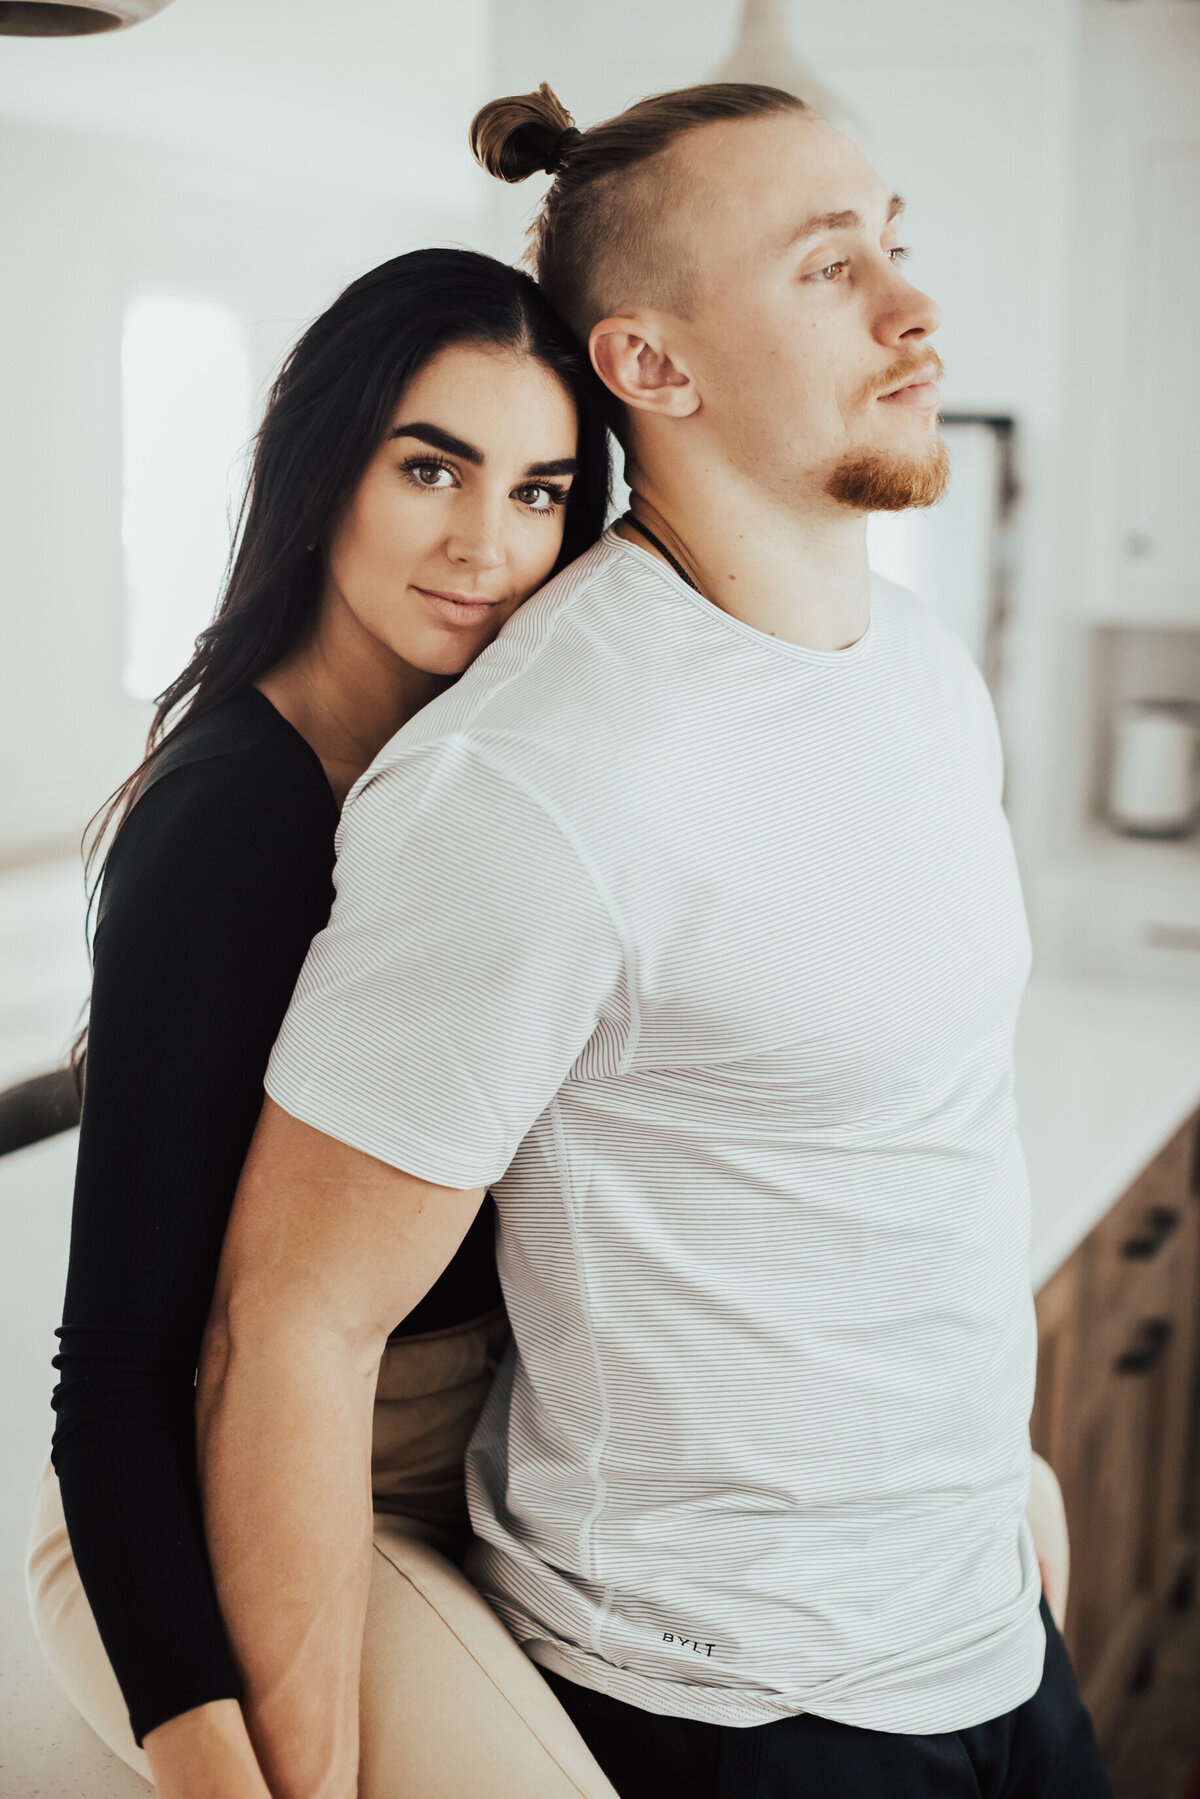 couple snuggling in kitchen on counter in home, George Kittle and Claire Kittle